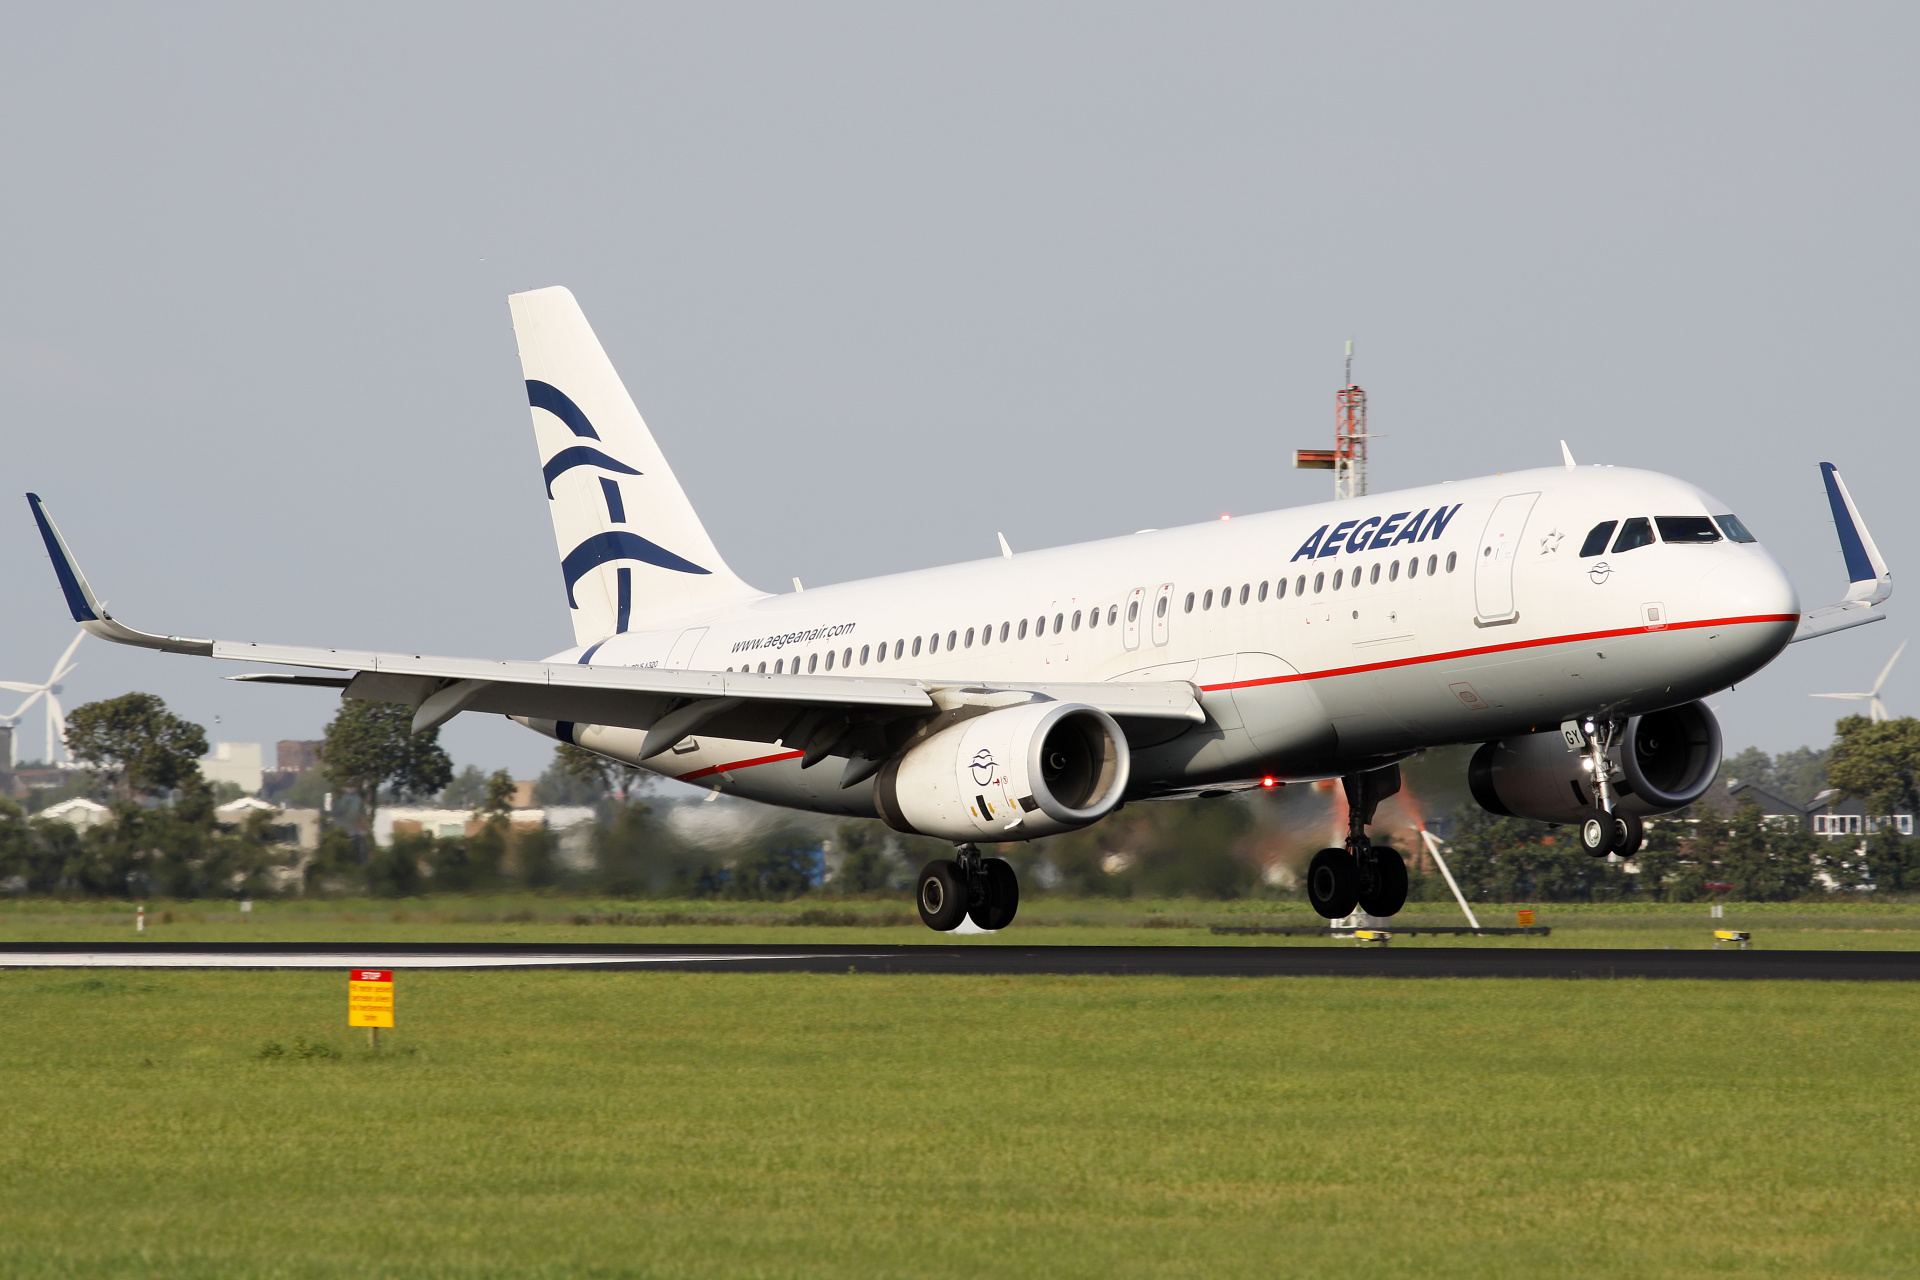 SX-DGY, Aegean Airlines (Samoloty » Spotting na Schiphol » Airbus A320-200)